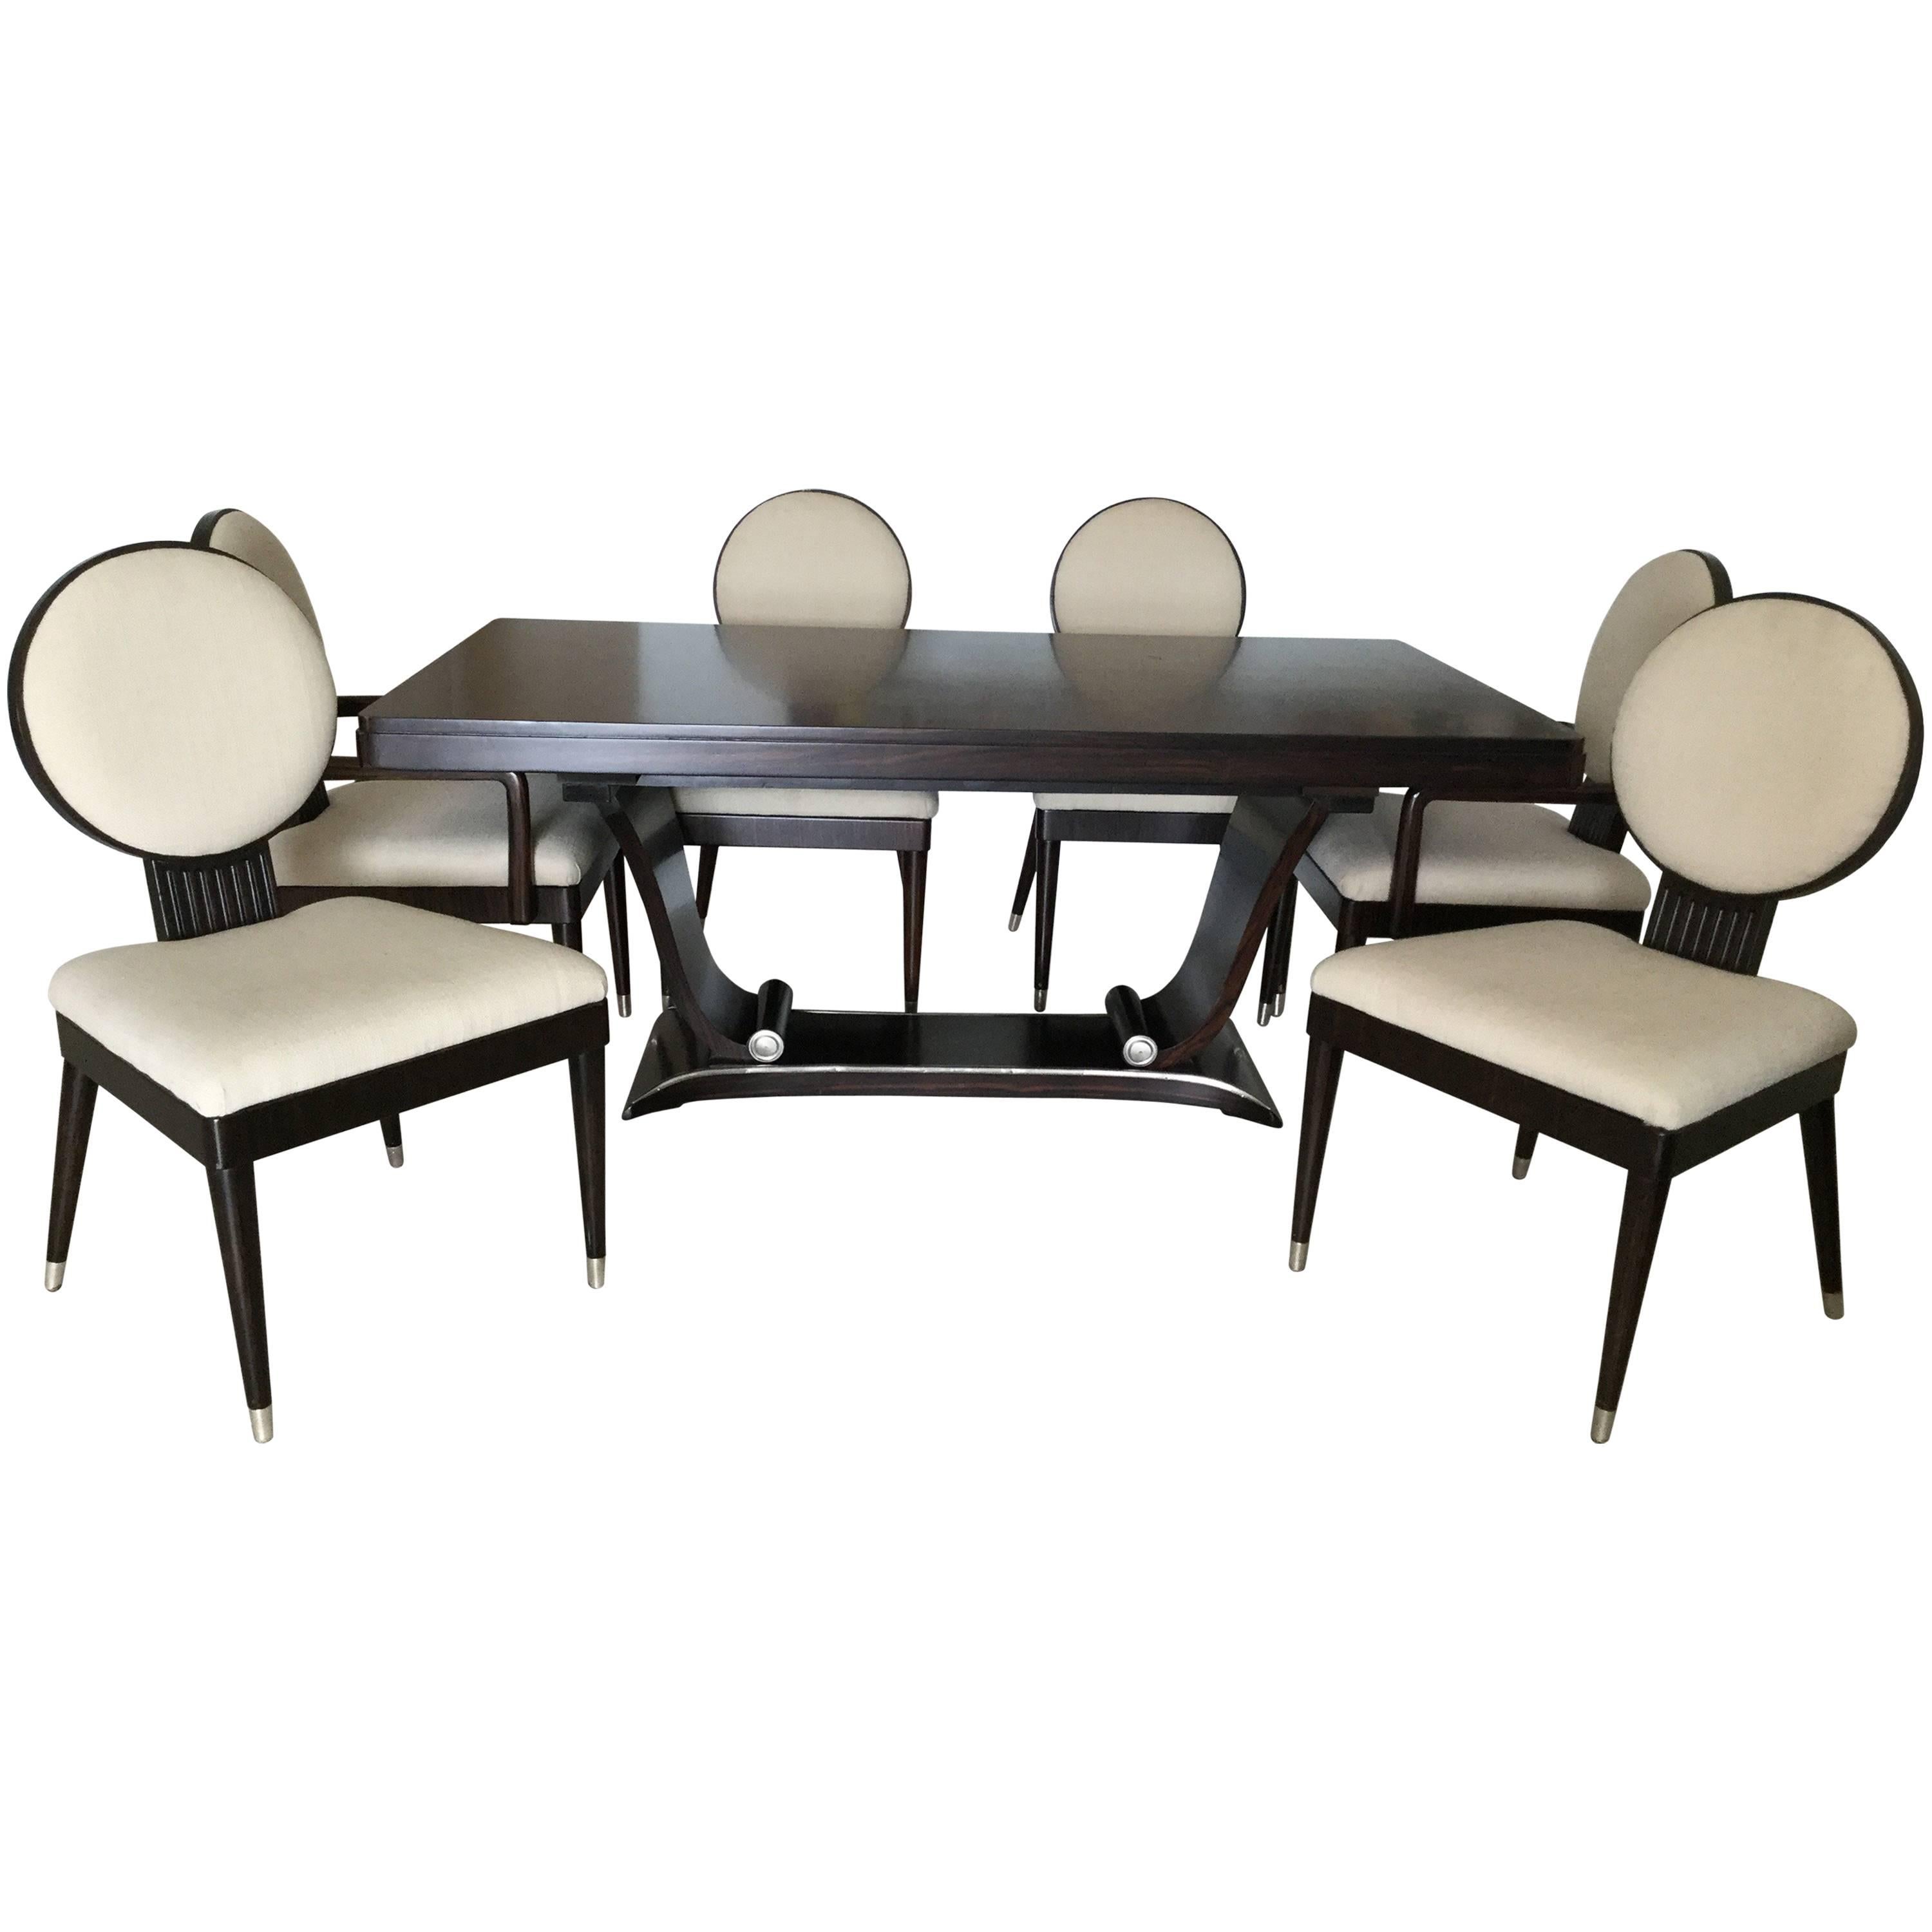 Fabulously Chic Italian Rosewood Dining Table and Chairs Dining Set